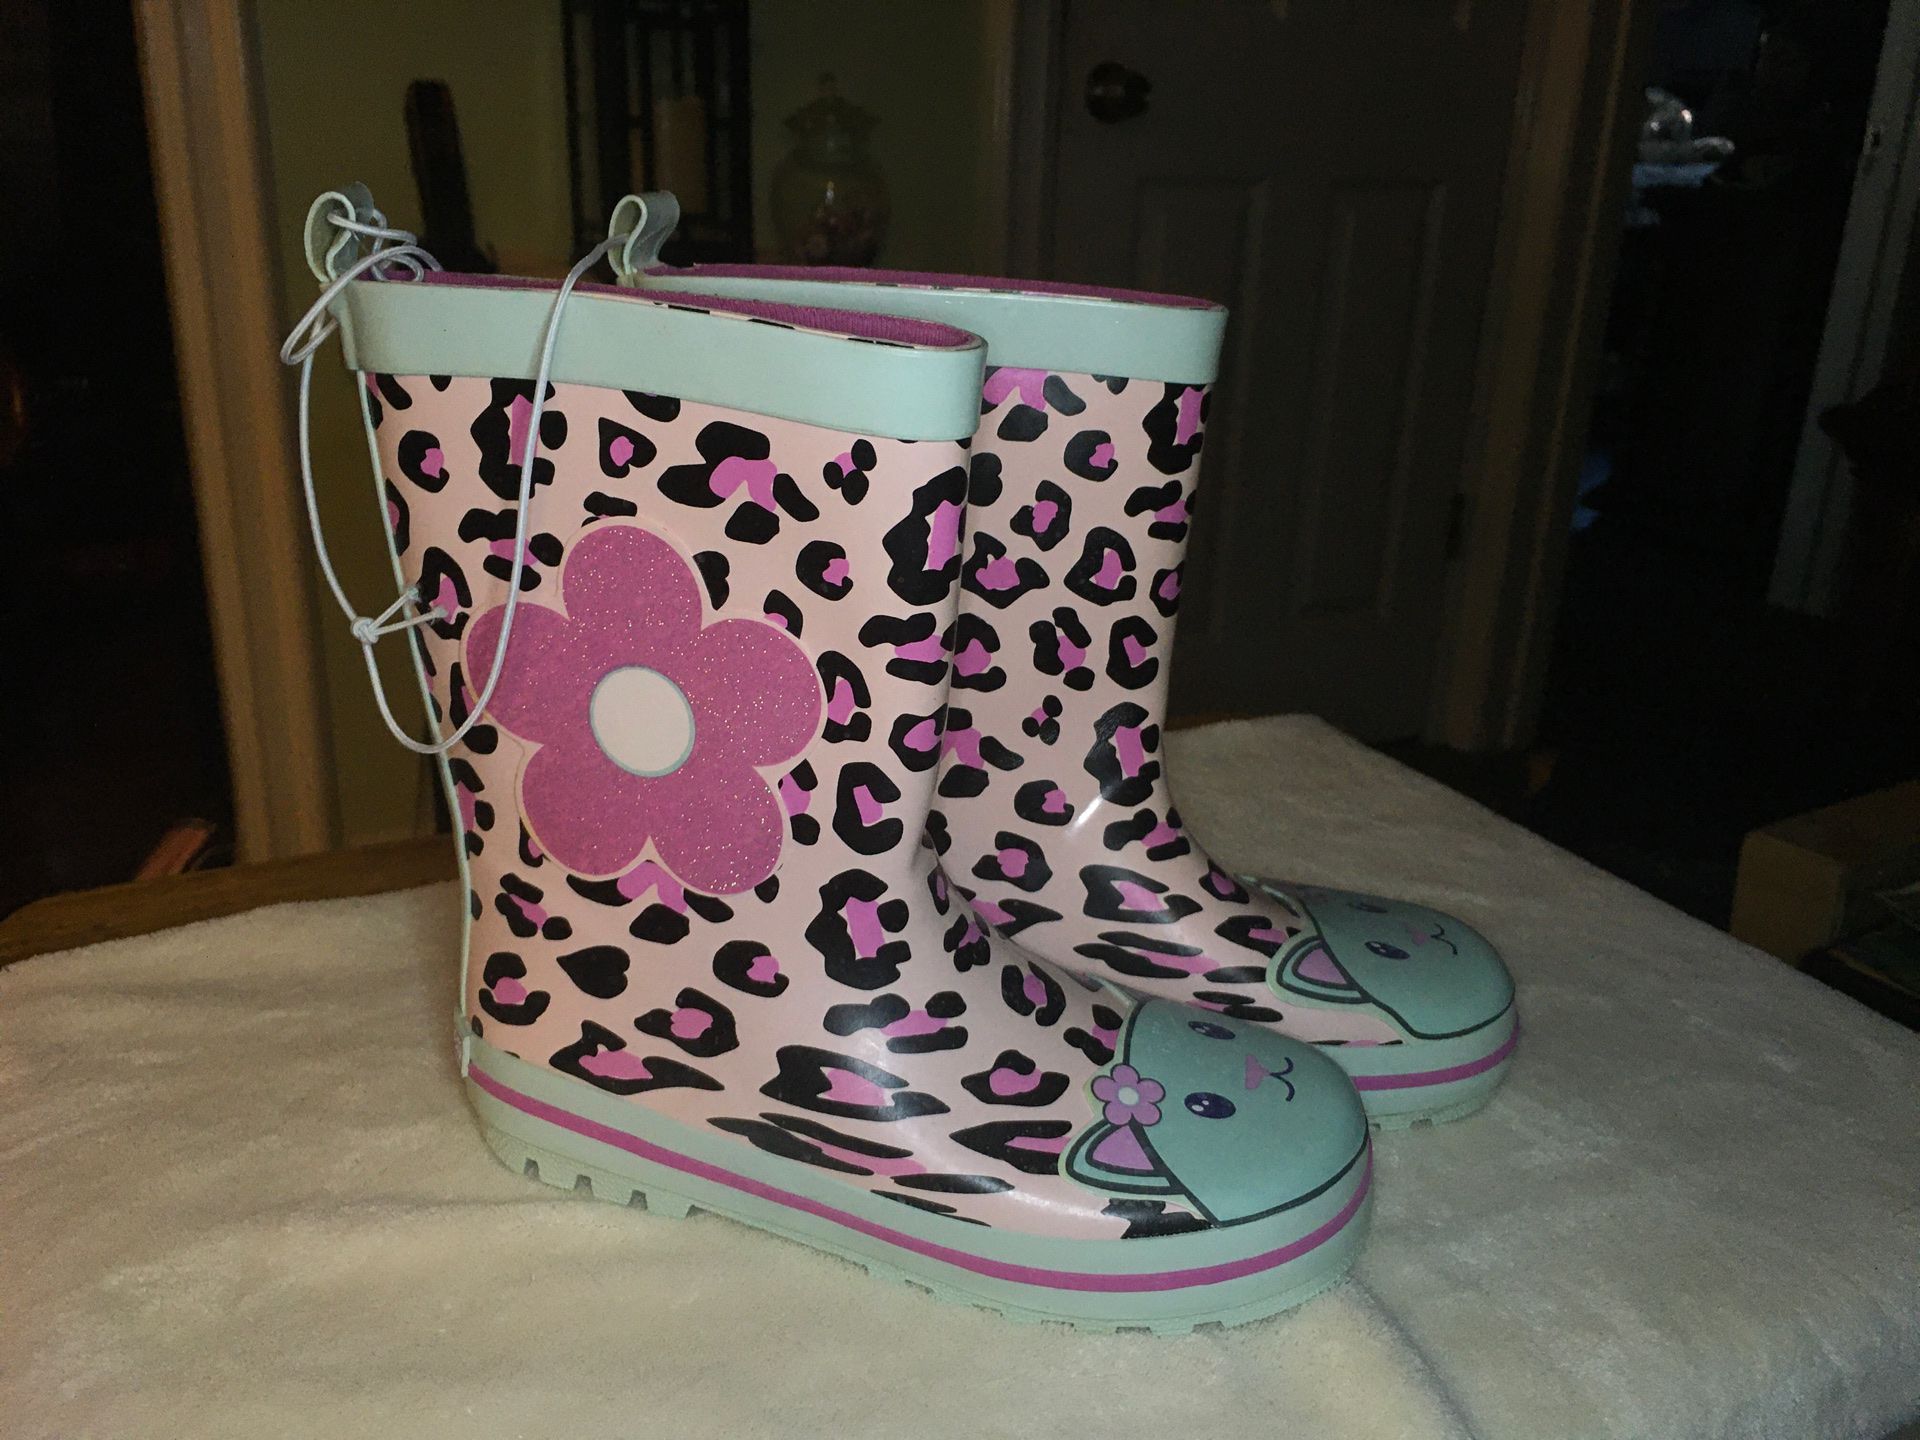 NEW LAURA ASHLEY PINK LEOPARD RAIN BOOTS SIZE Y13 in Inglewood 90301